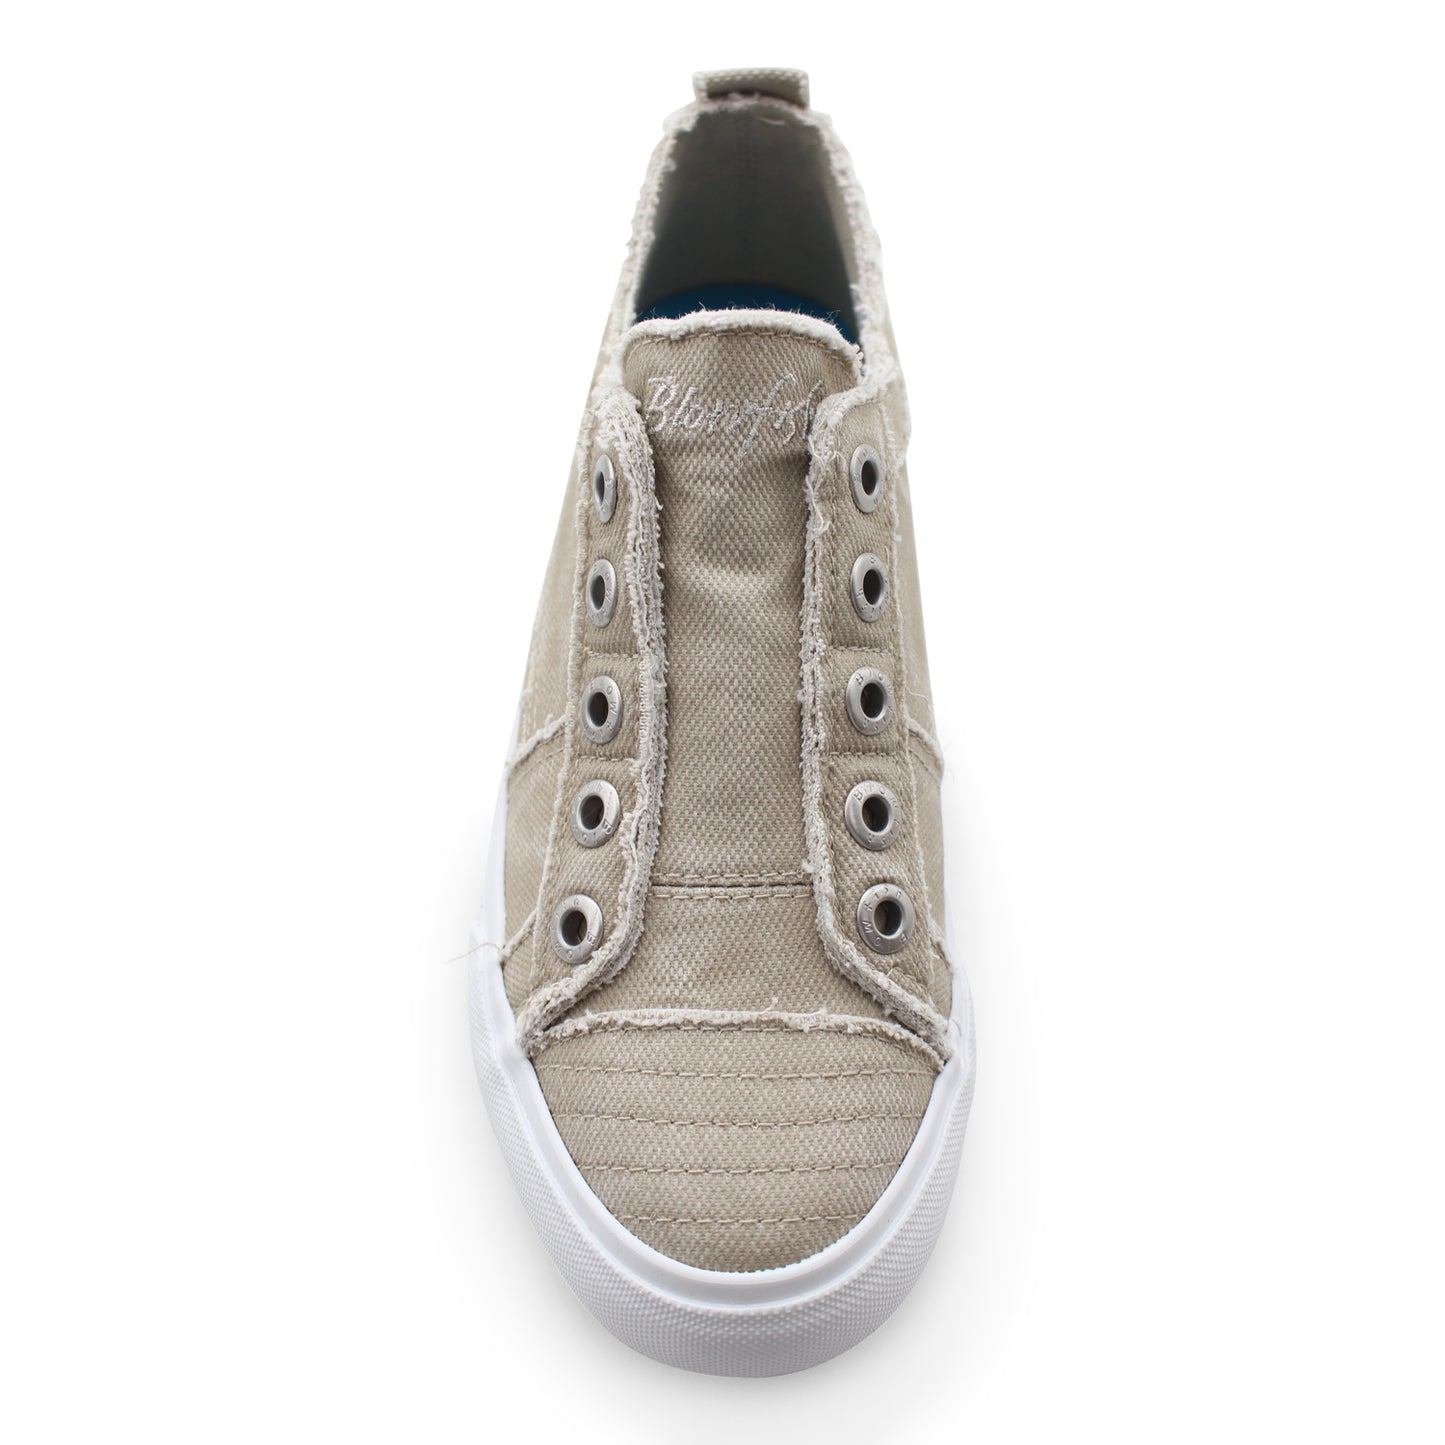 PLAY Casual Canvas Sneaker